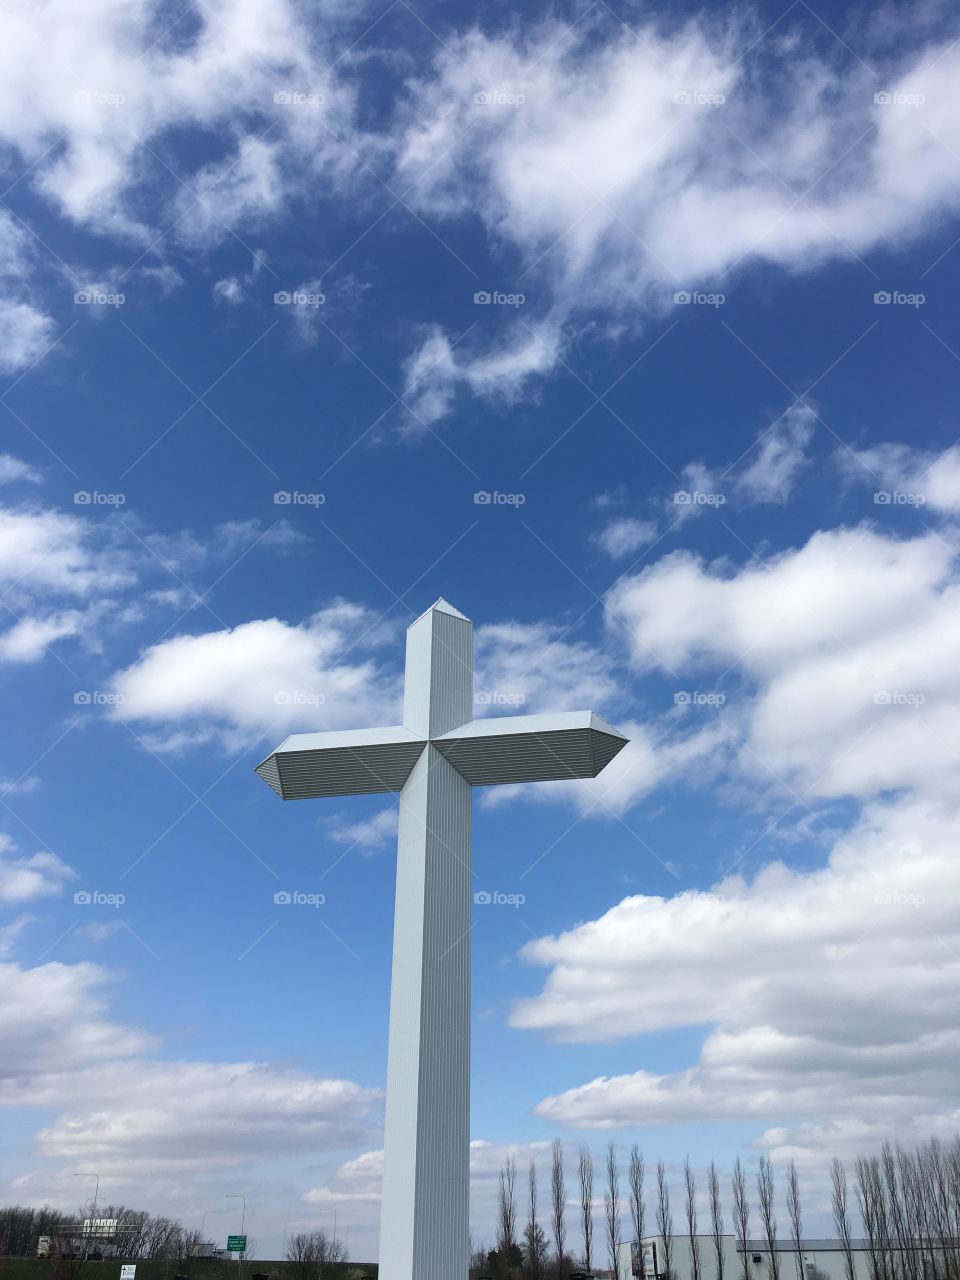 No Person, Sky, Outdoors, Cross, Daylight